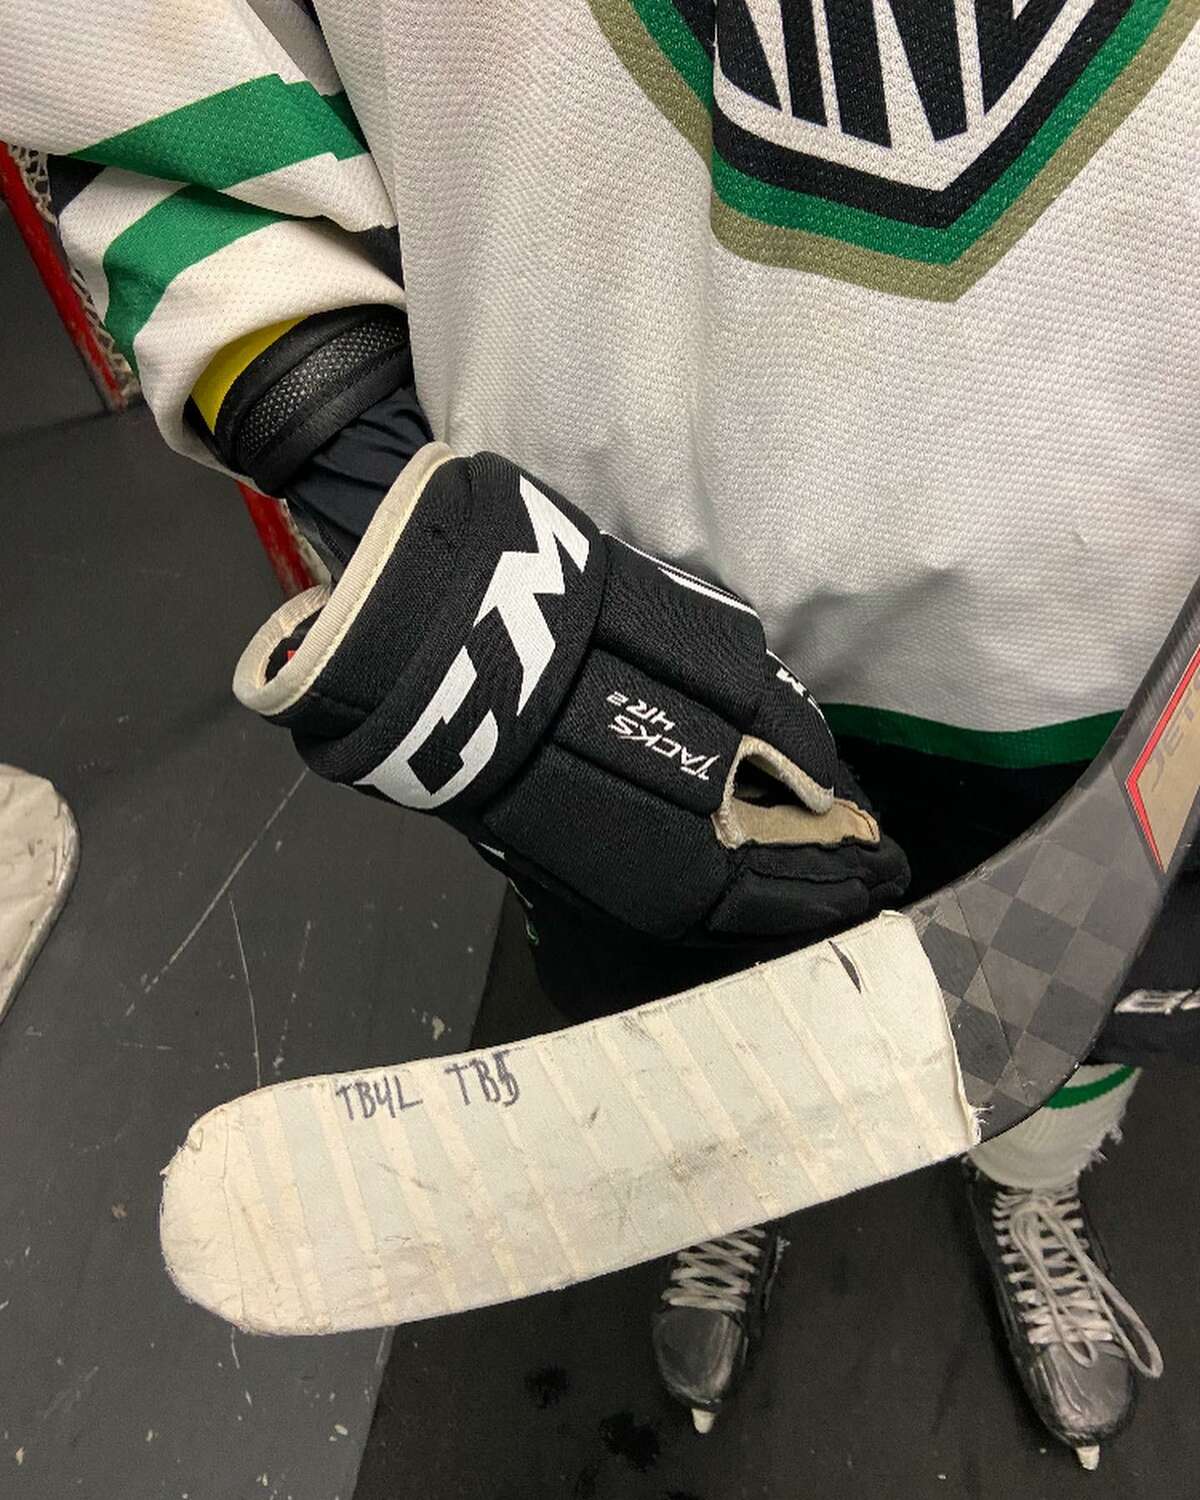 Sam Brande, who started a petition in the wake of the death of his friend Teddy Balkind, shows off his stick that includes Balkind’s initials. Brande’s petition calls for a requirement, not a recommendation of neck guards in hockey.